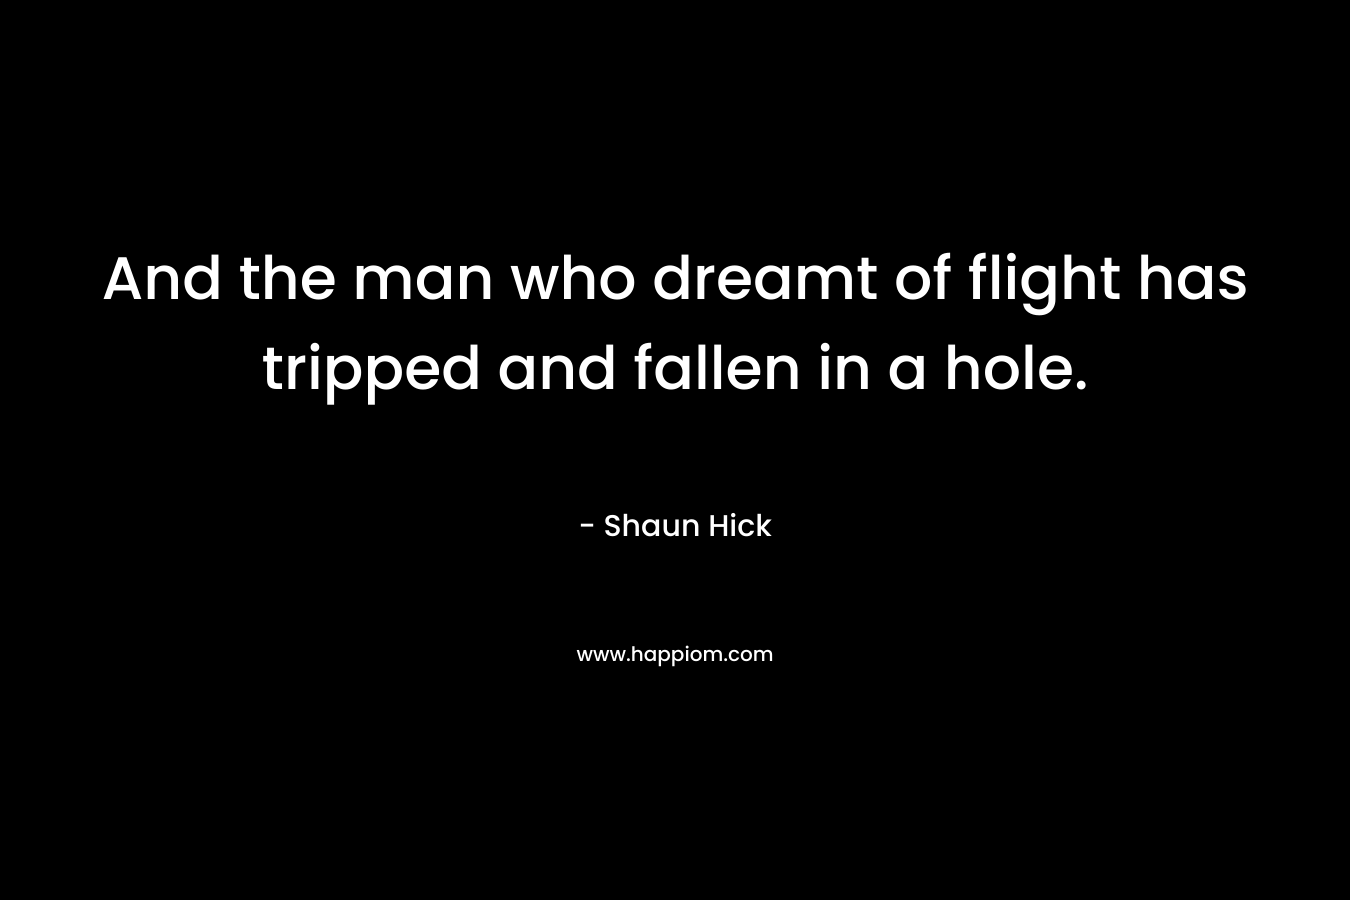 And the man who dreamt of flight has tripped and fallen in a hole.